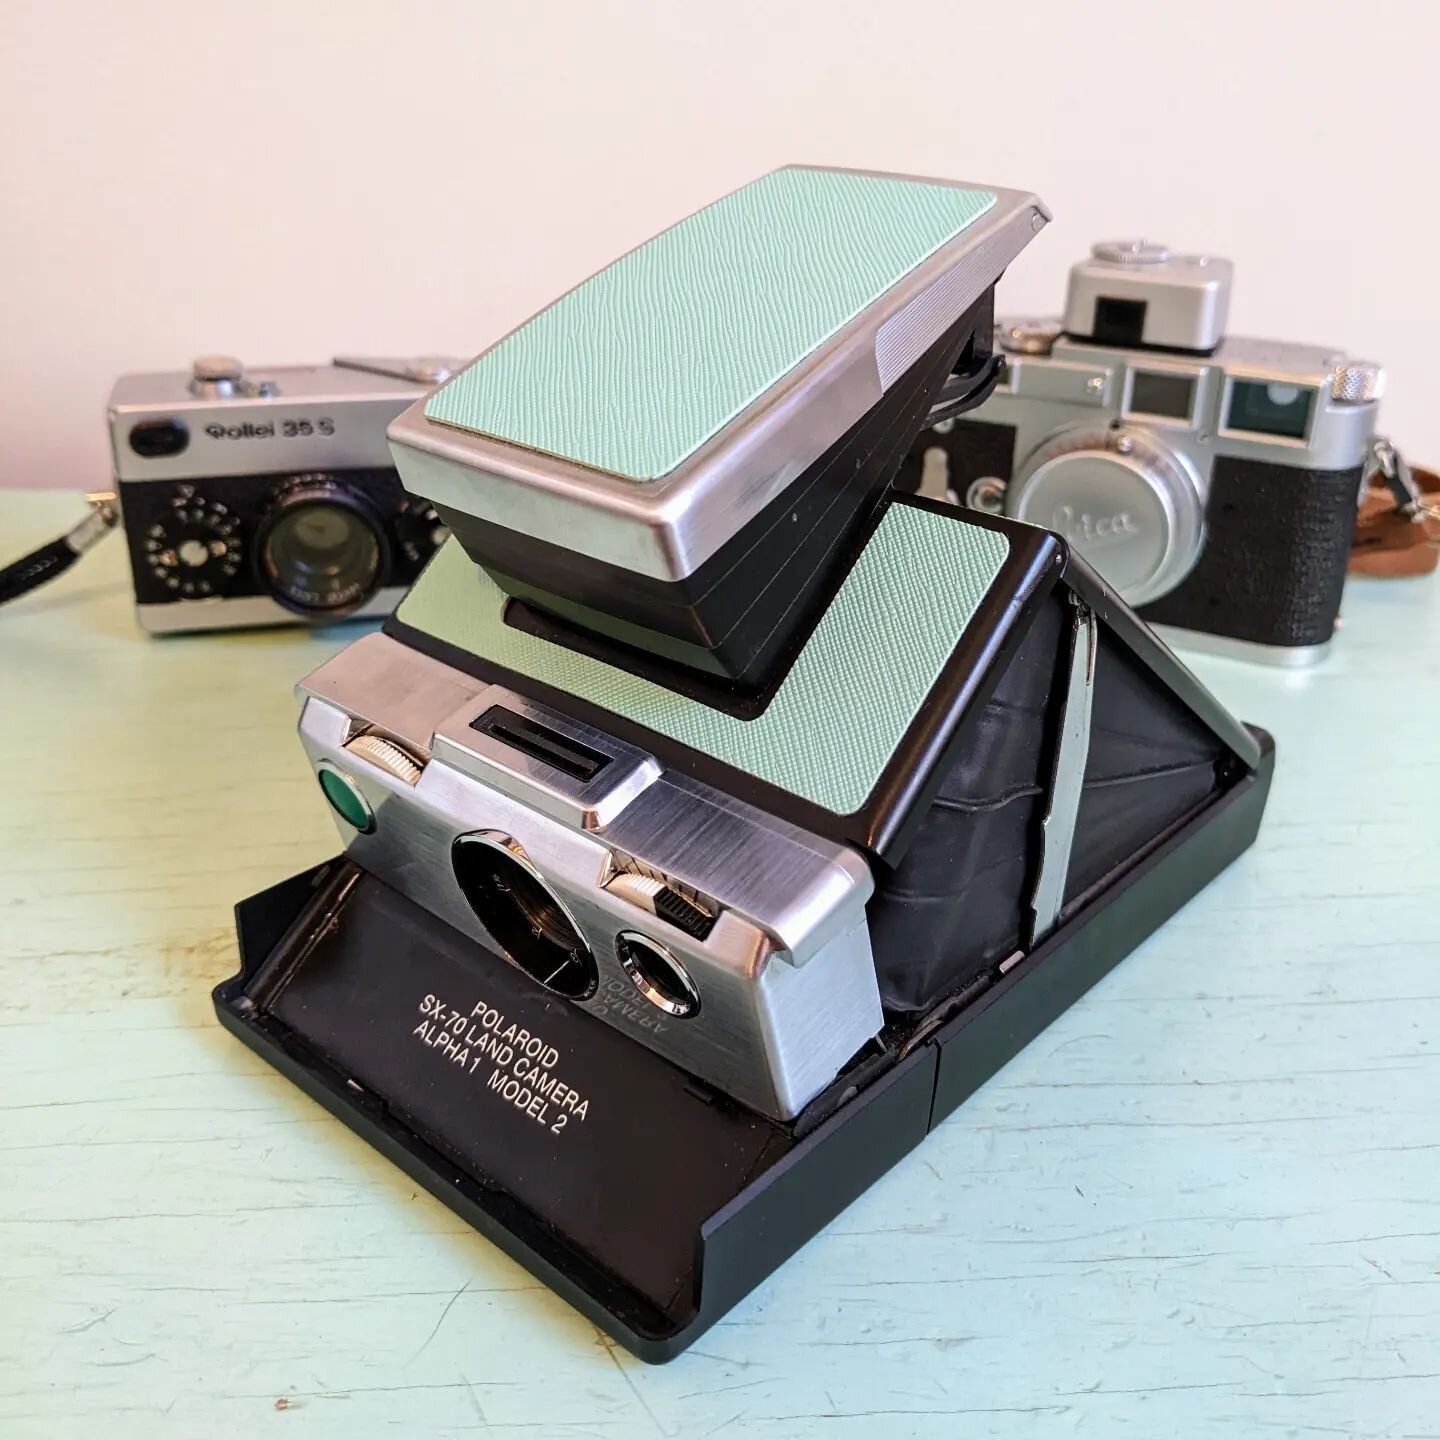 Shout out to @jacobchristopherfilm for letting me borrow this modified Polaroid SX70! I have been low key mad that I wasted money on my Polaroid 600 camera + film, but glad I have this much superior camera to be able to use up the film I have for the